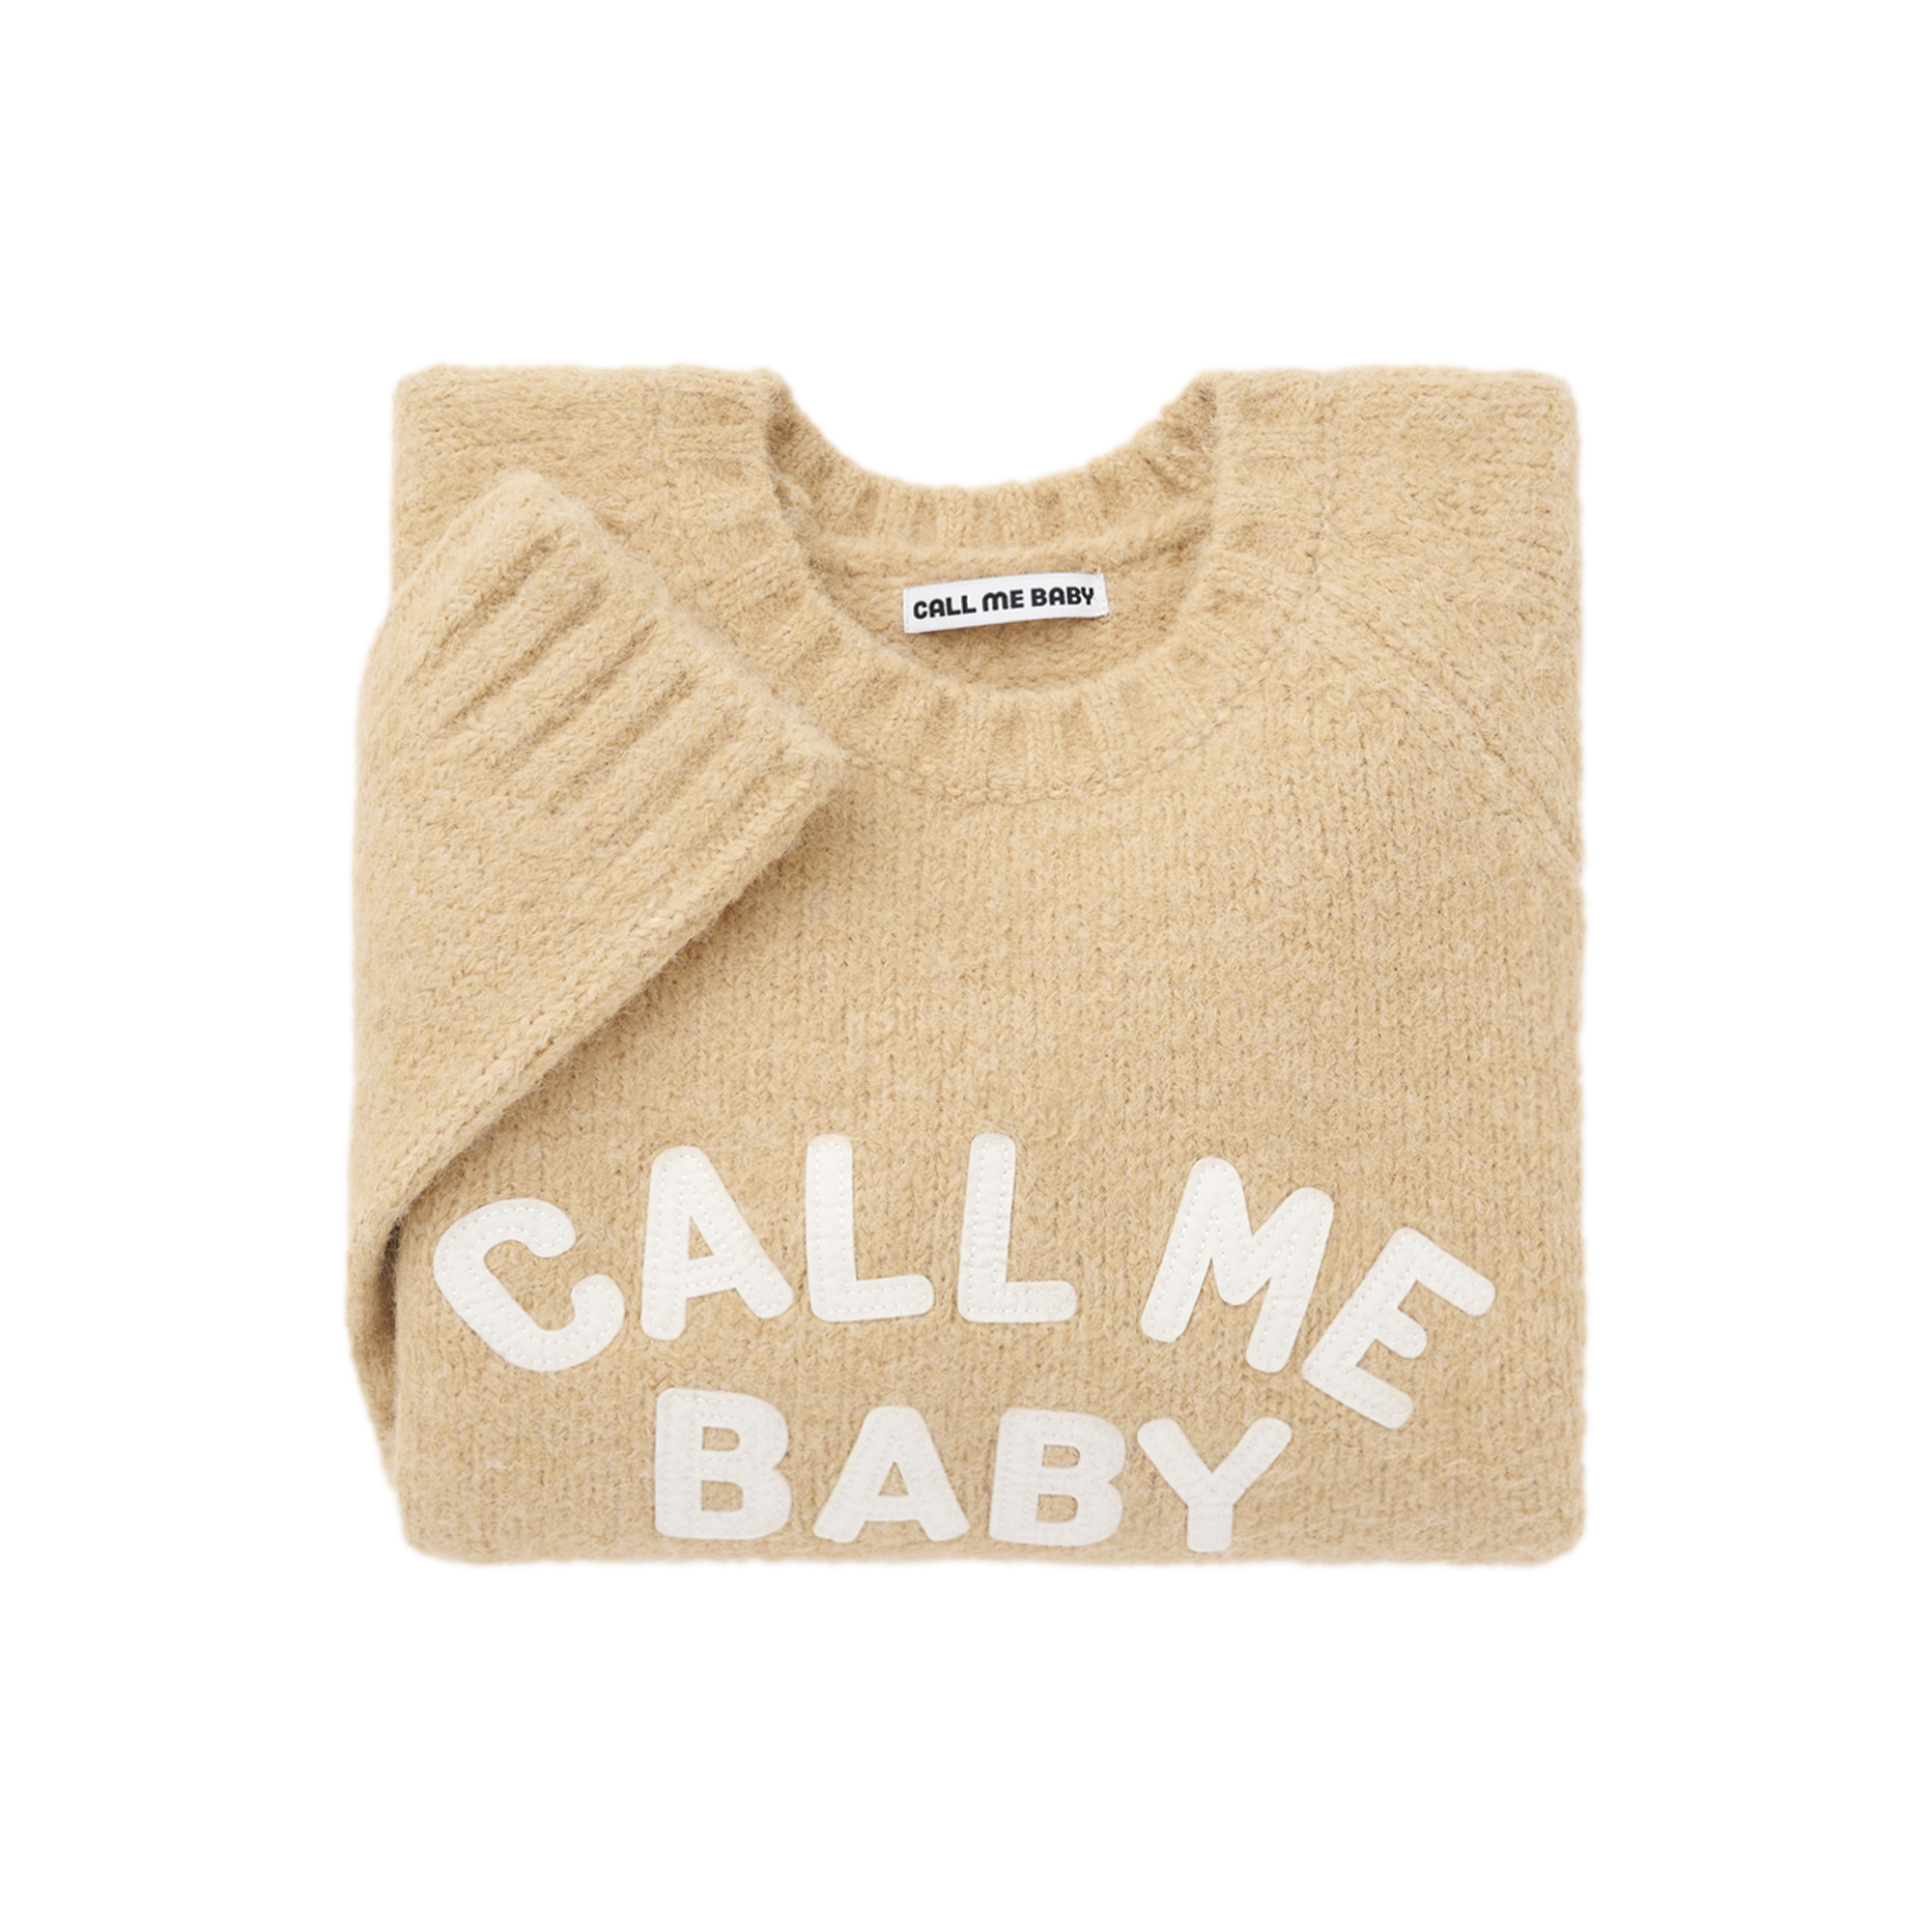 [Call me baby] CMB Bunny Sweater _ Peacan Pie (28% Sale)